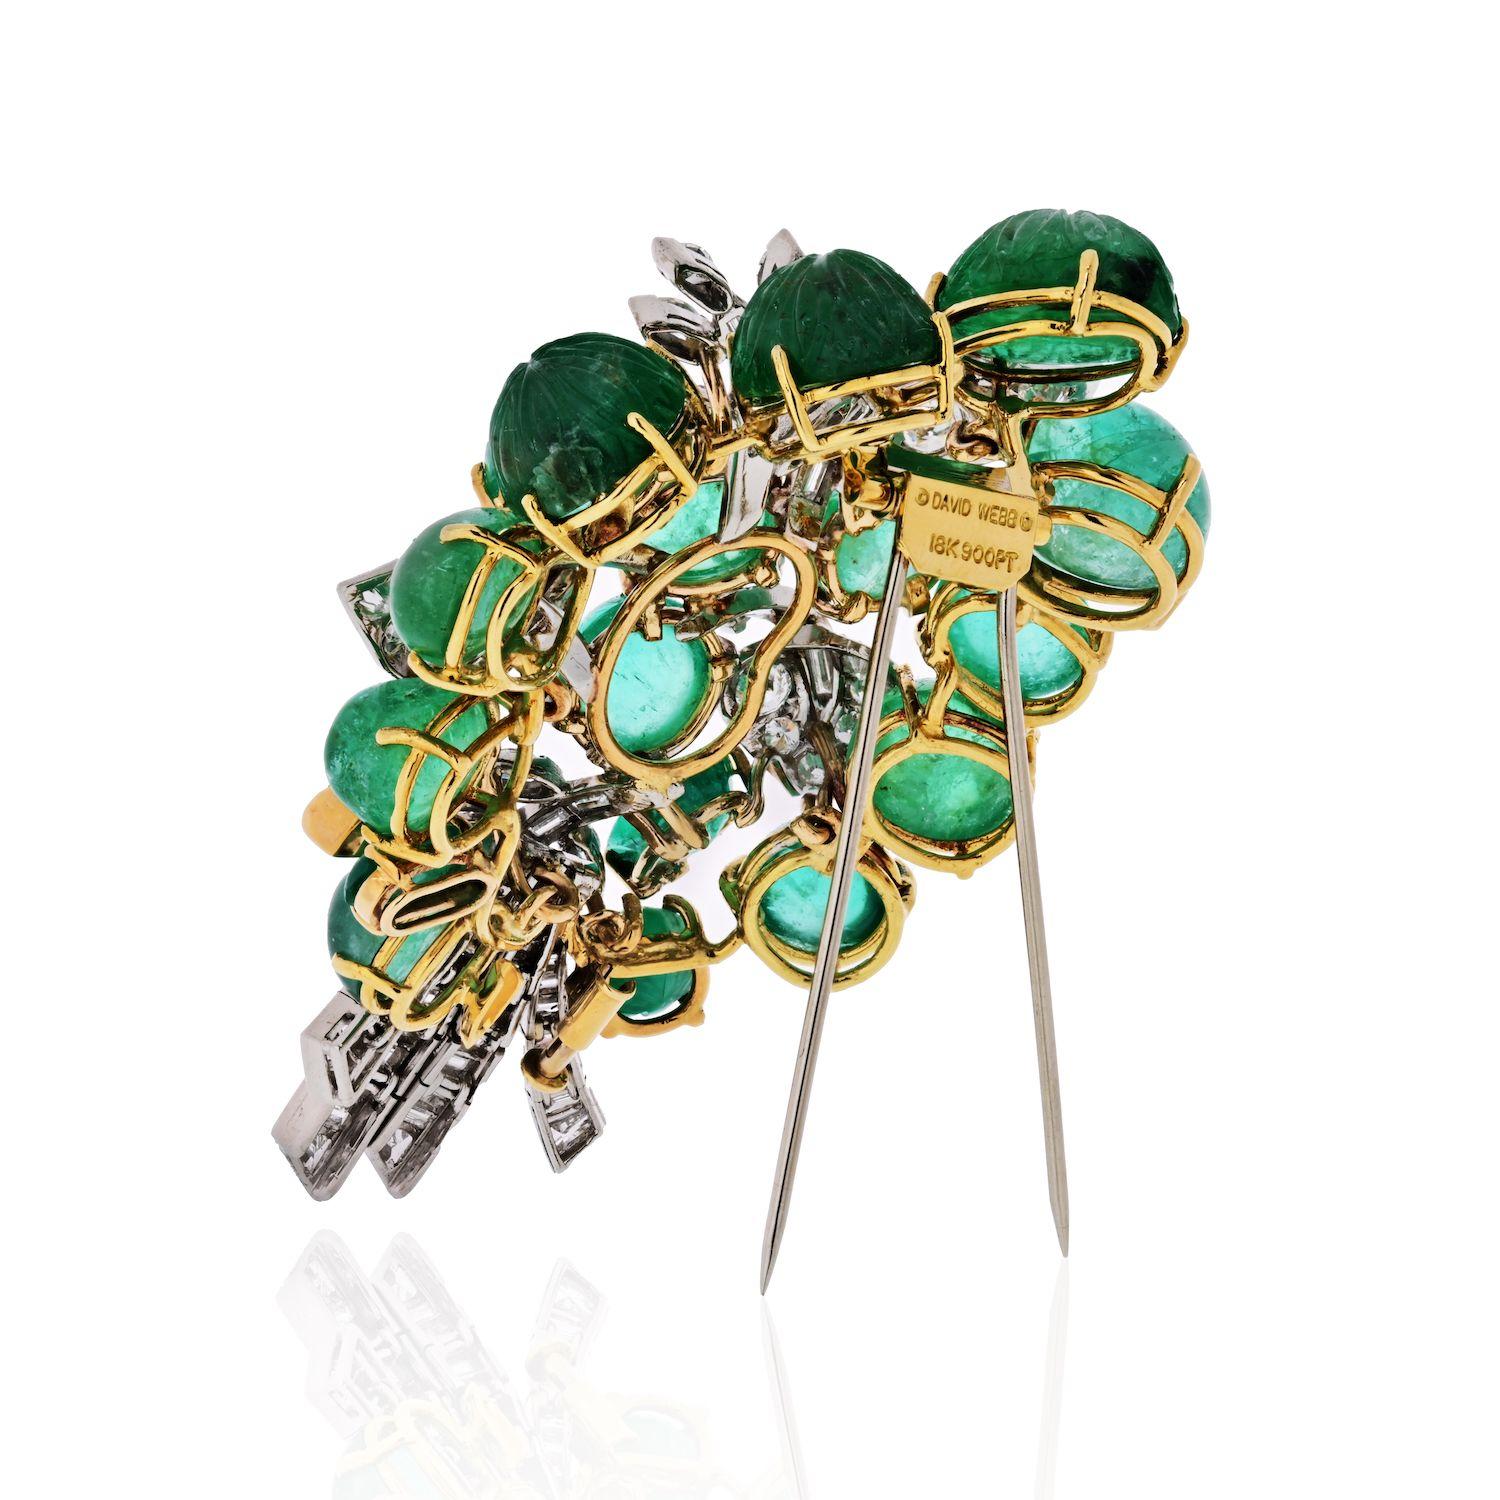 David Webb platinum brooch crafted with carved green emeralds and dimaonds. An impressive dress brooch of approx. 3 inches in length executed in a stylized foliate motif.
Containing close to 20 cabochon emeralds, some carved and some not, round,